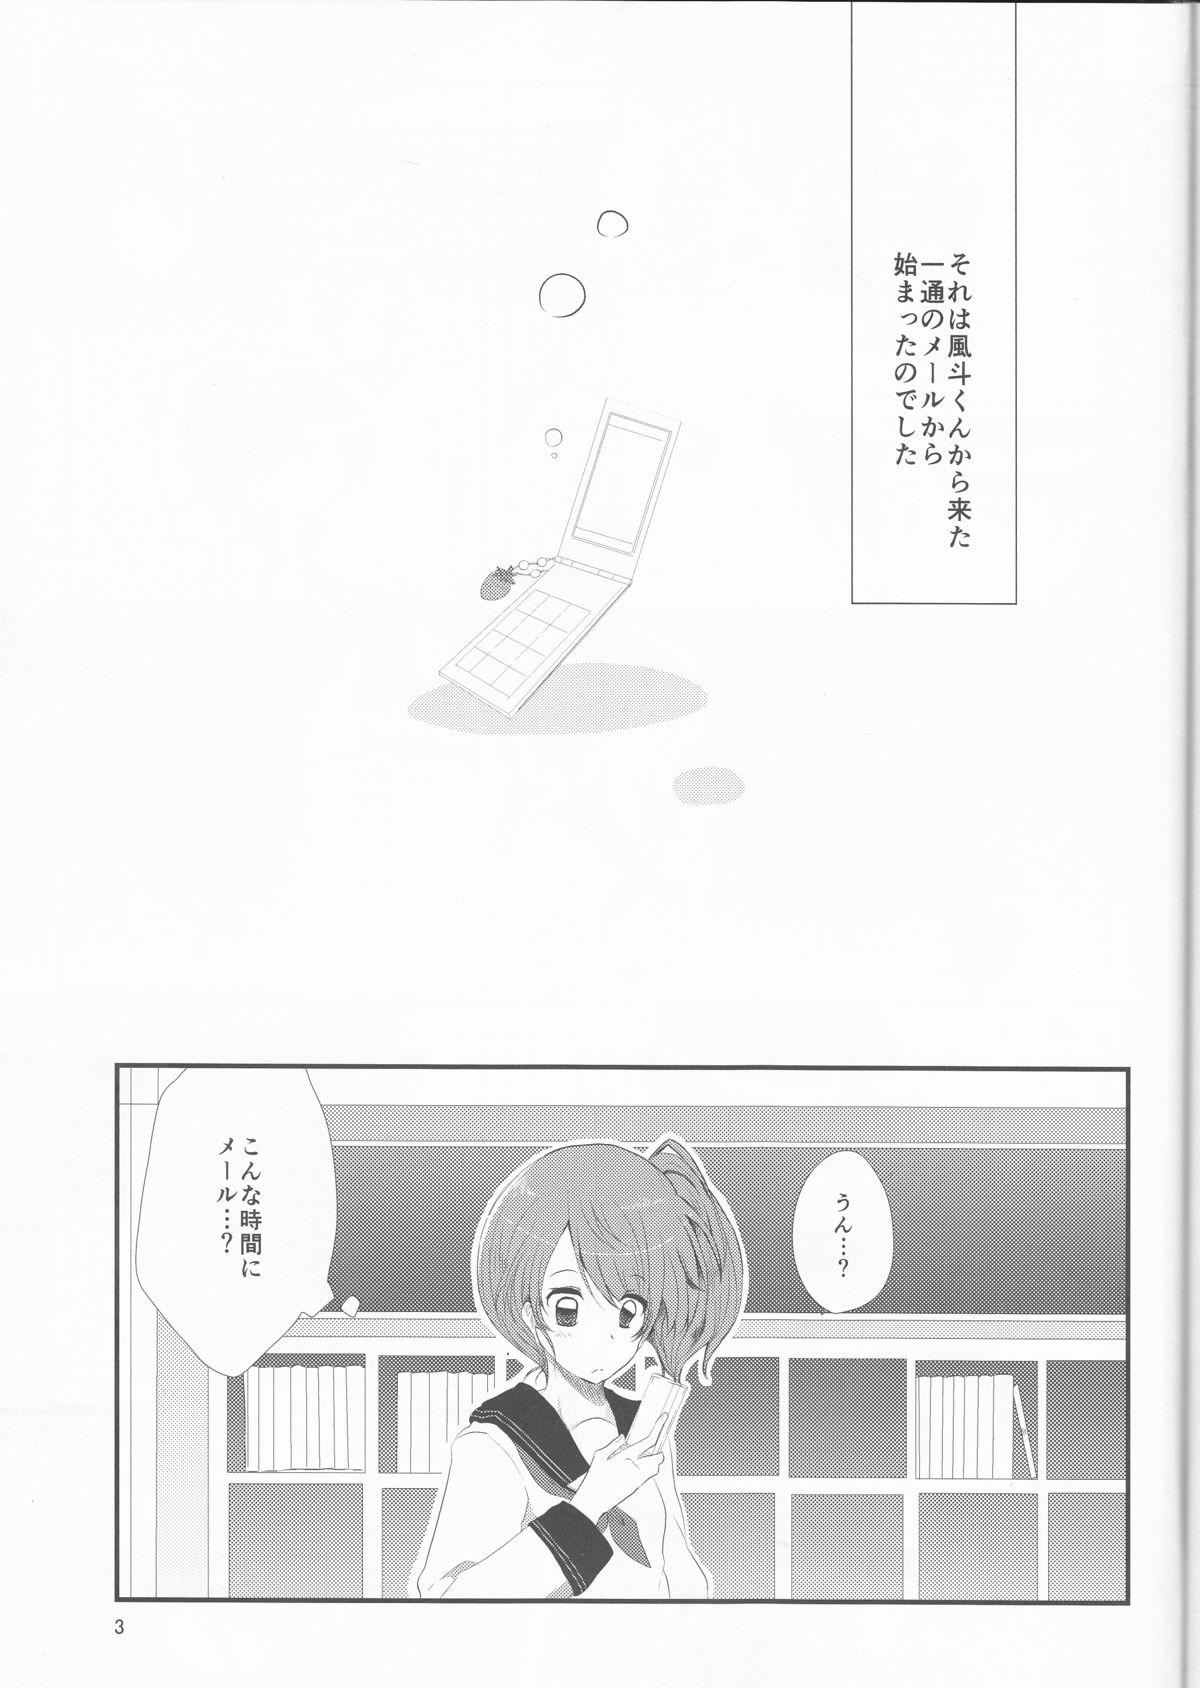 Pussylick Unfair Game no Ketsumatsu wa - Brothers conflict Tranny - Page 3